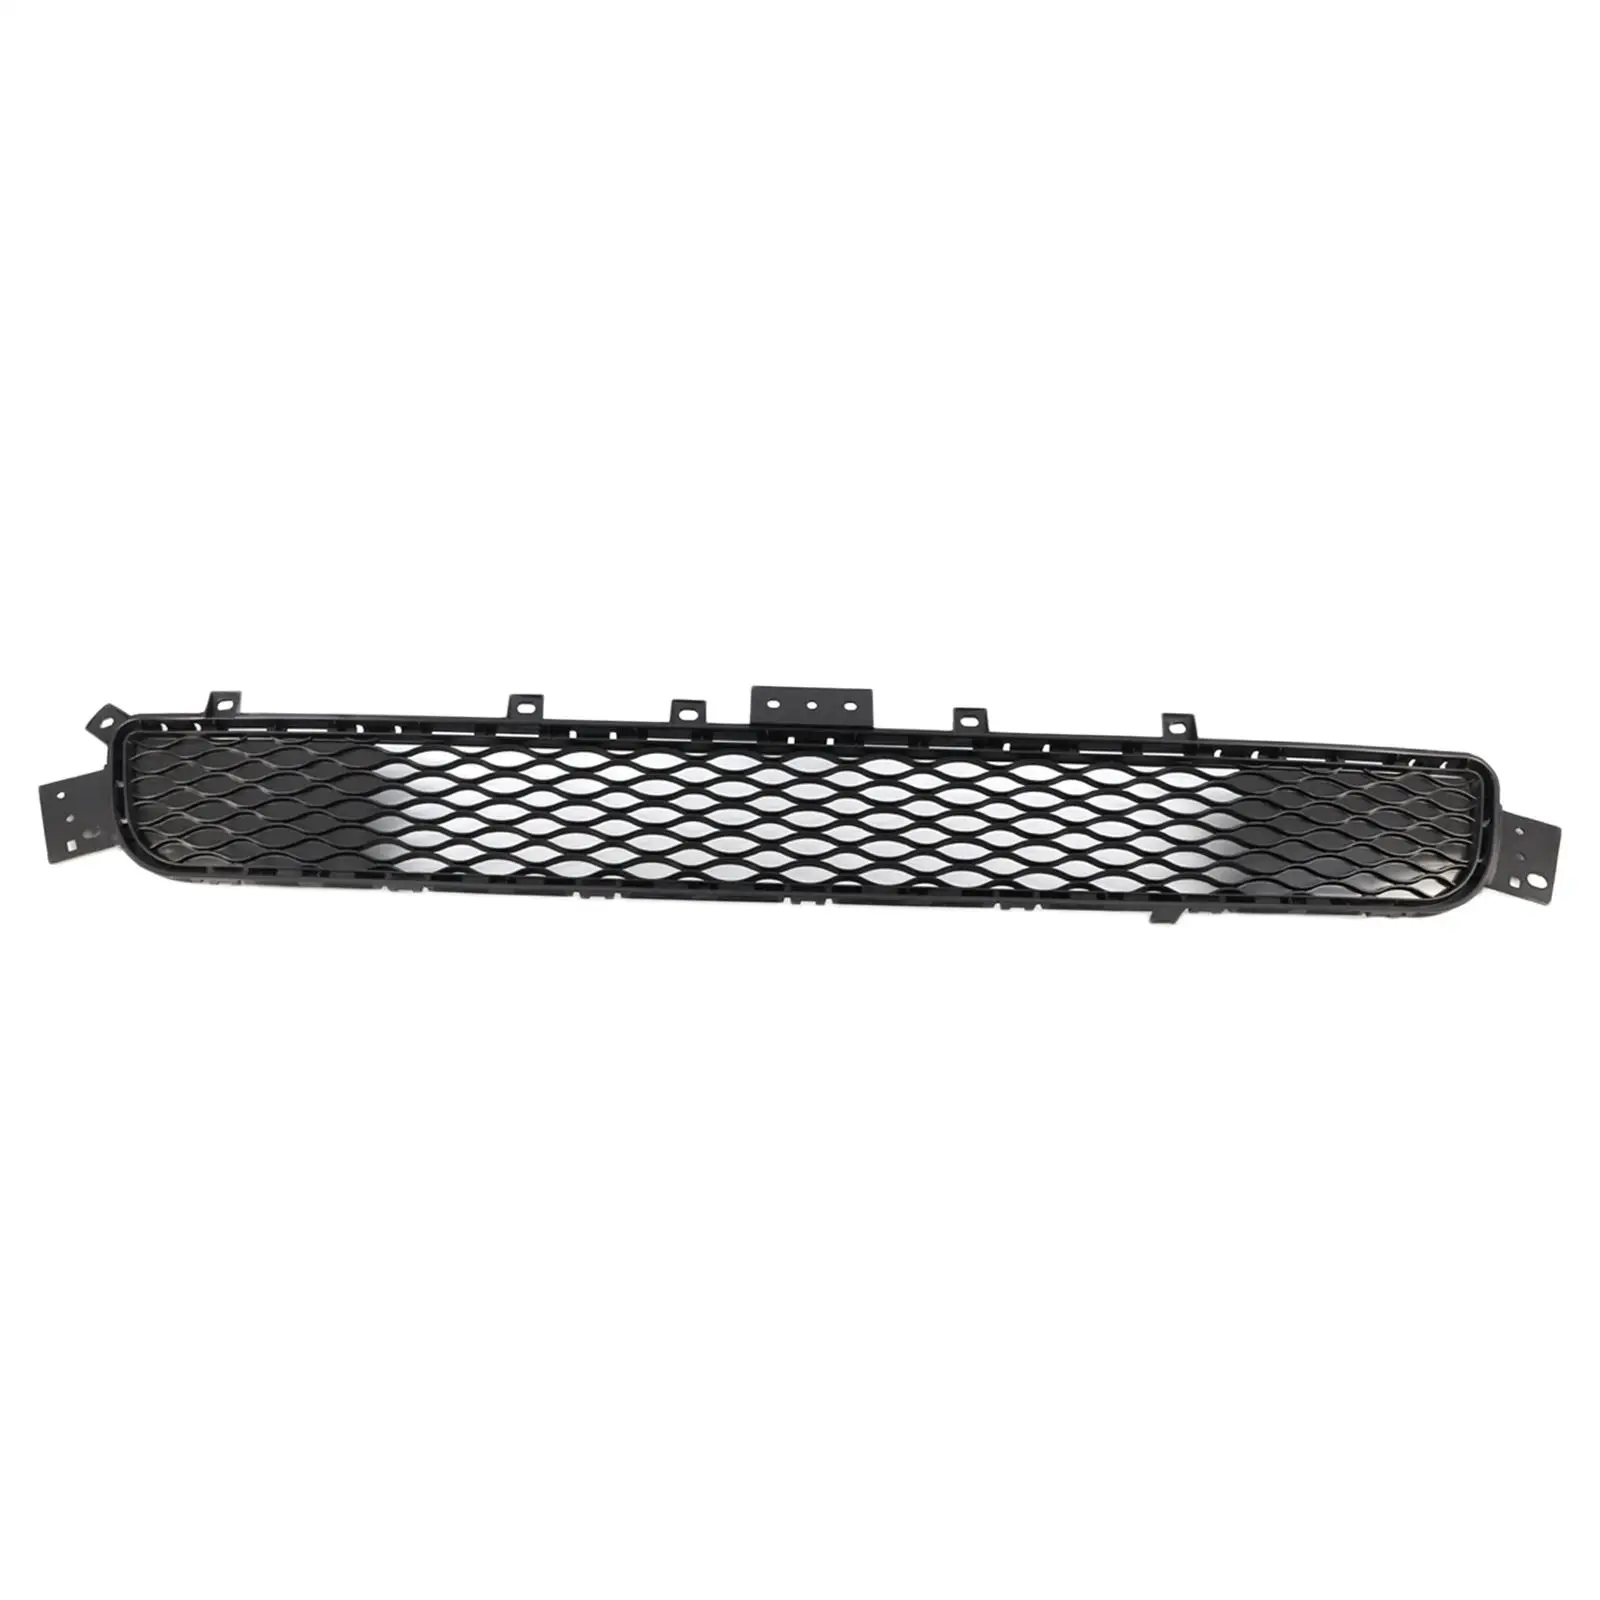 Front Bumper Lower Mesh Grille Guard for Q50 2014-17 Upgrade Replacement